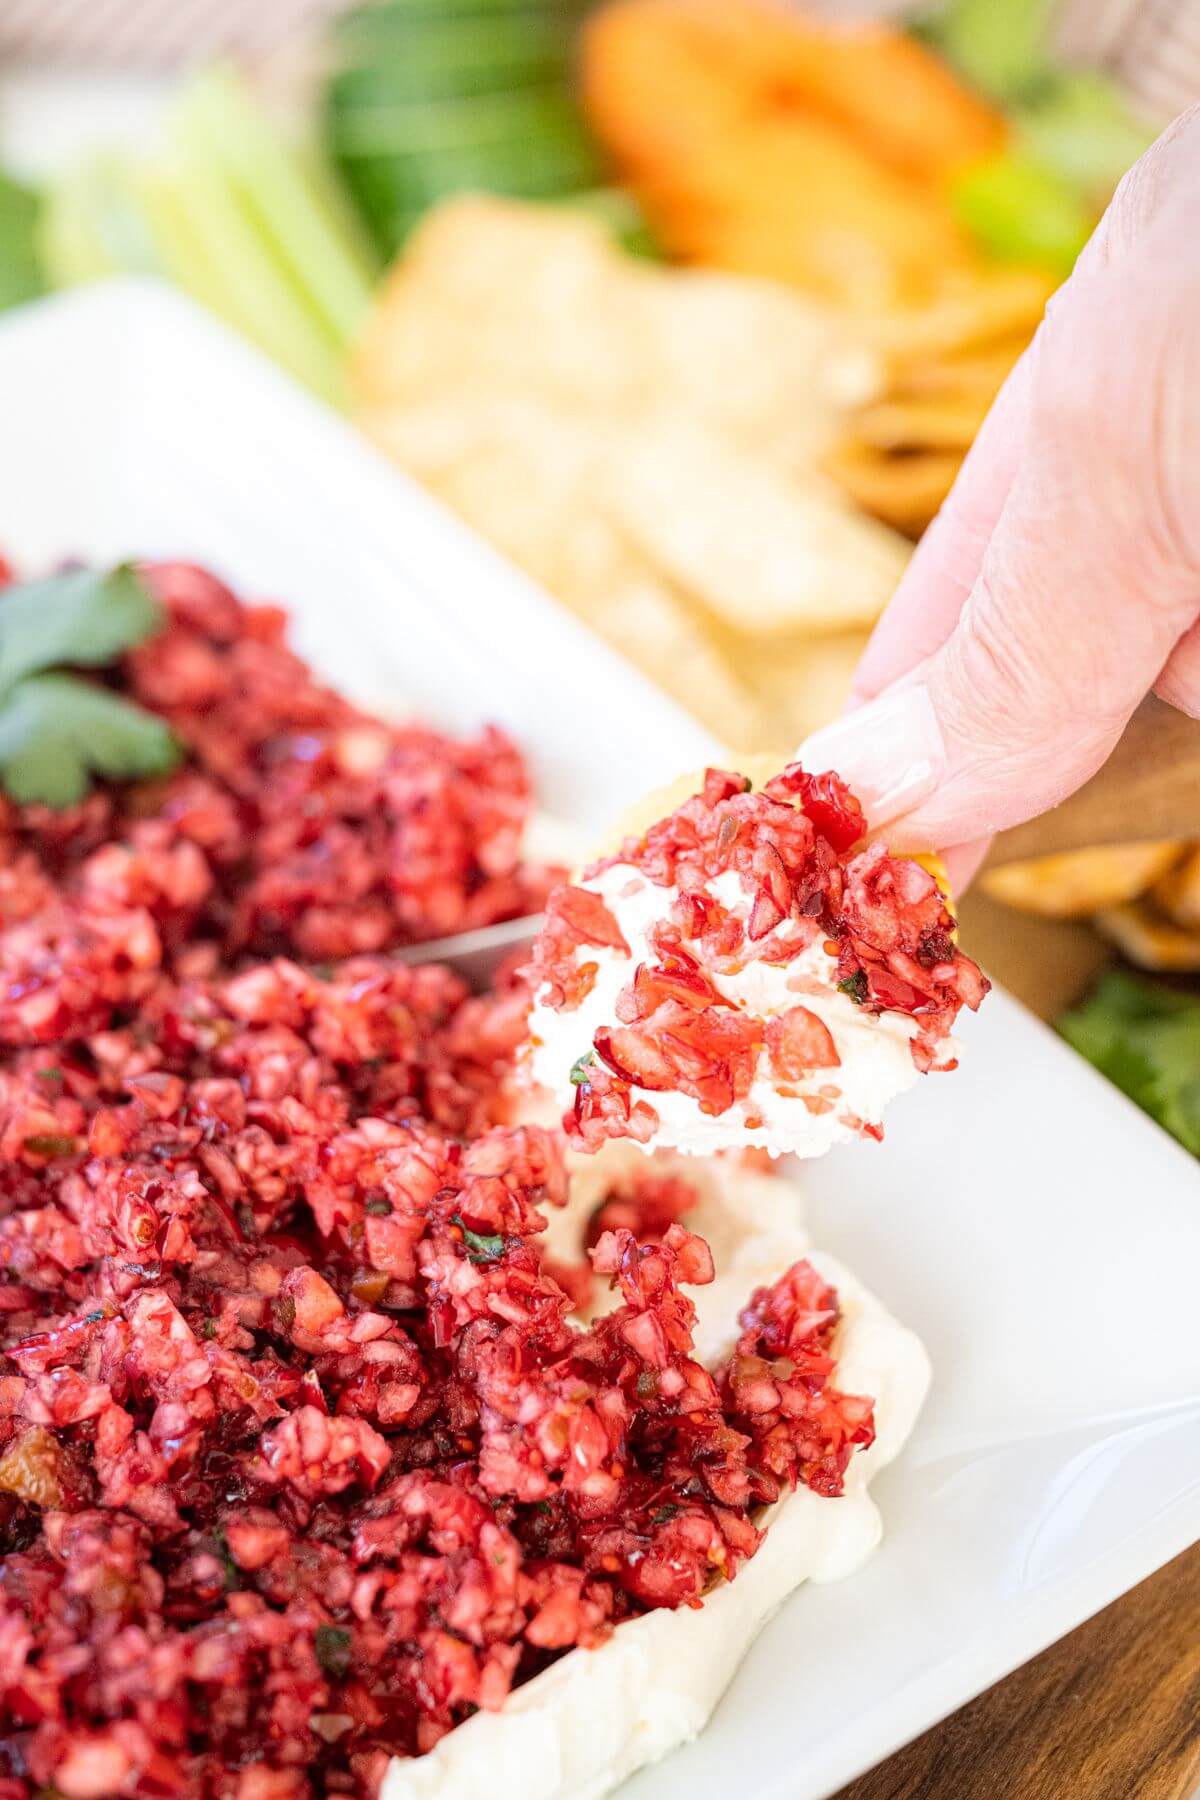 A hand is dipping food into the cranberry dip.